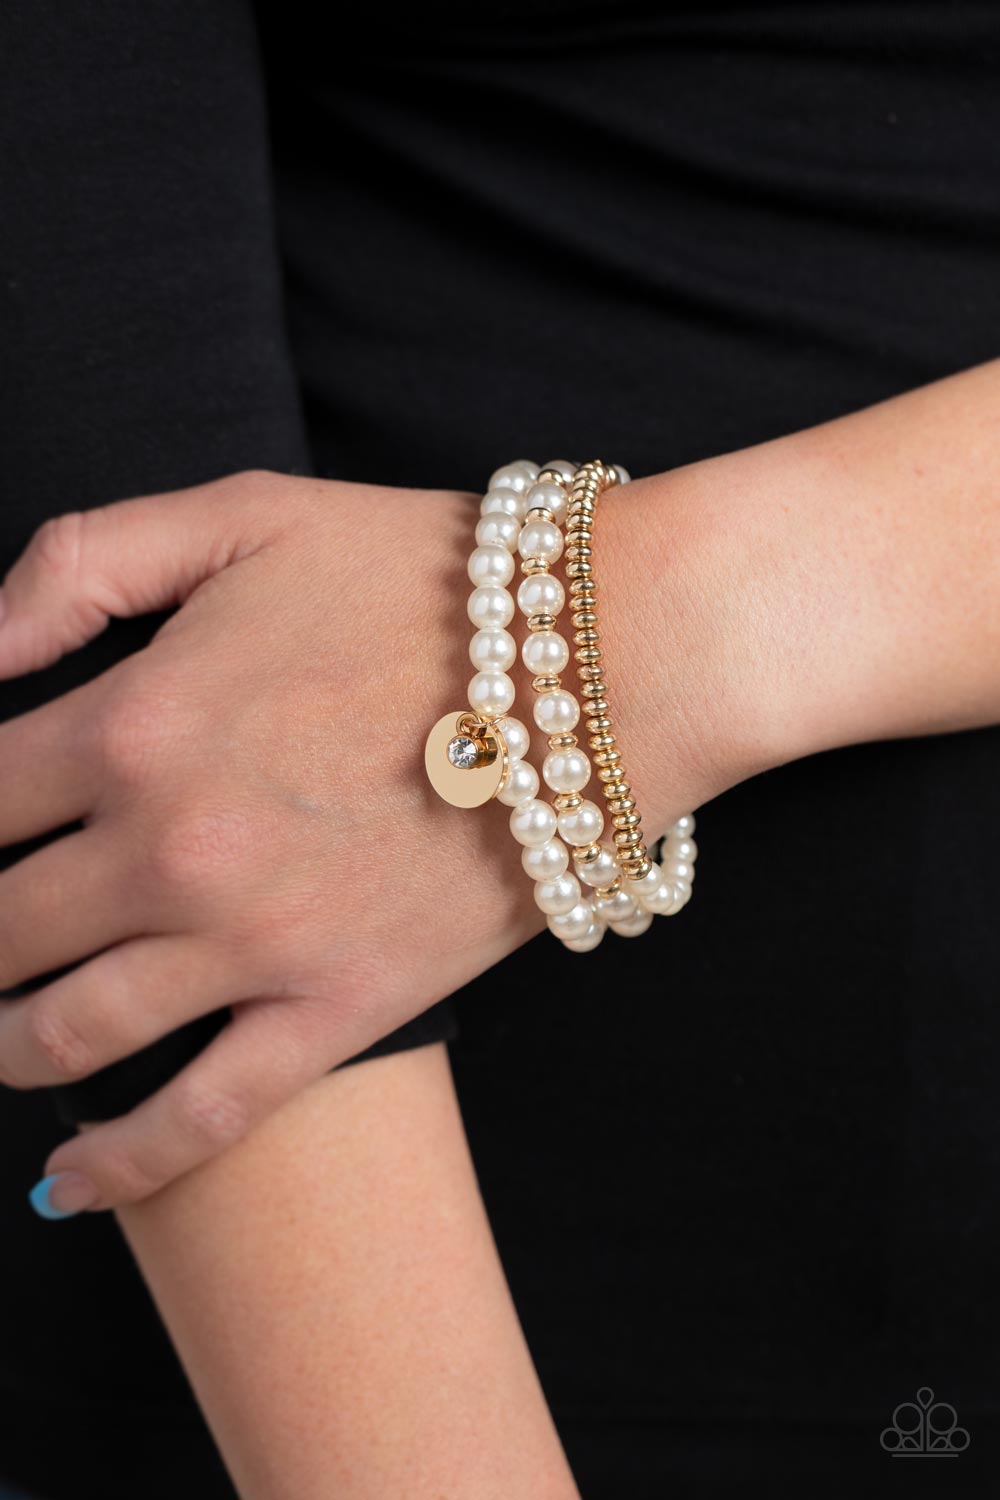 Pearly Professional Gold Bracelet - Paparazzi Accessories  Classic white pearls, glistening gold beads, and a white crystal rhinestone are threaded along elastic stretchy bands, creating refined layers across the wrist.  Sold as one set of three bracelets.  P9RE-GDXX-373XX